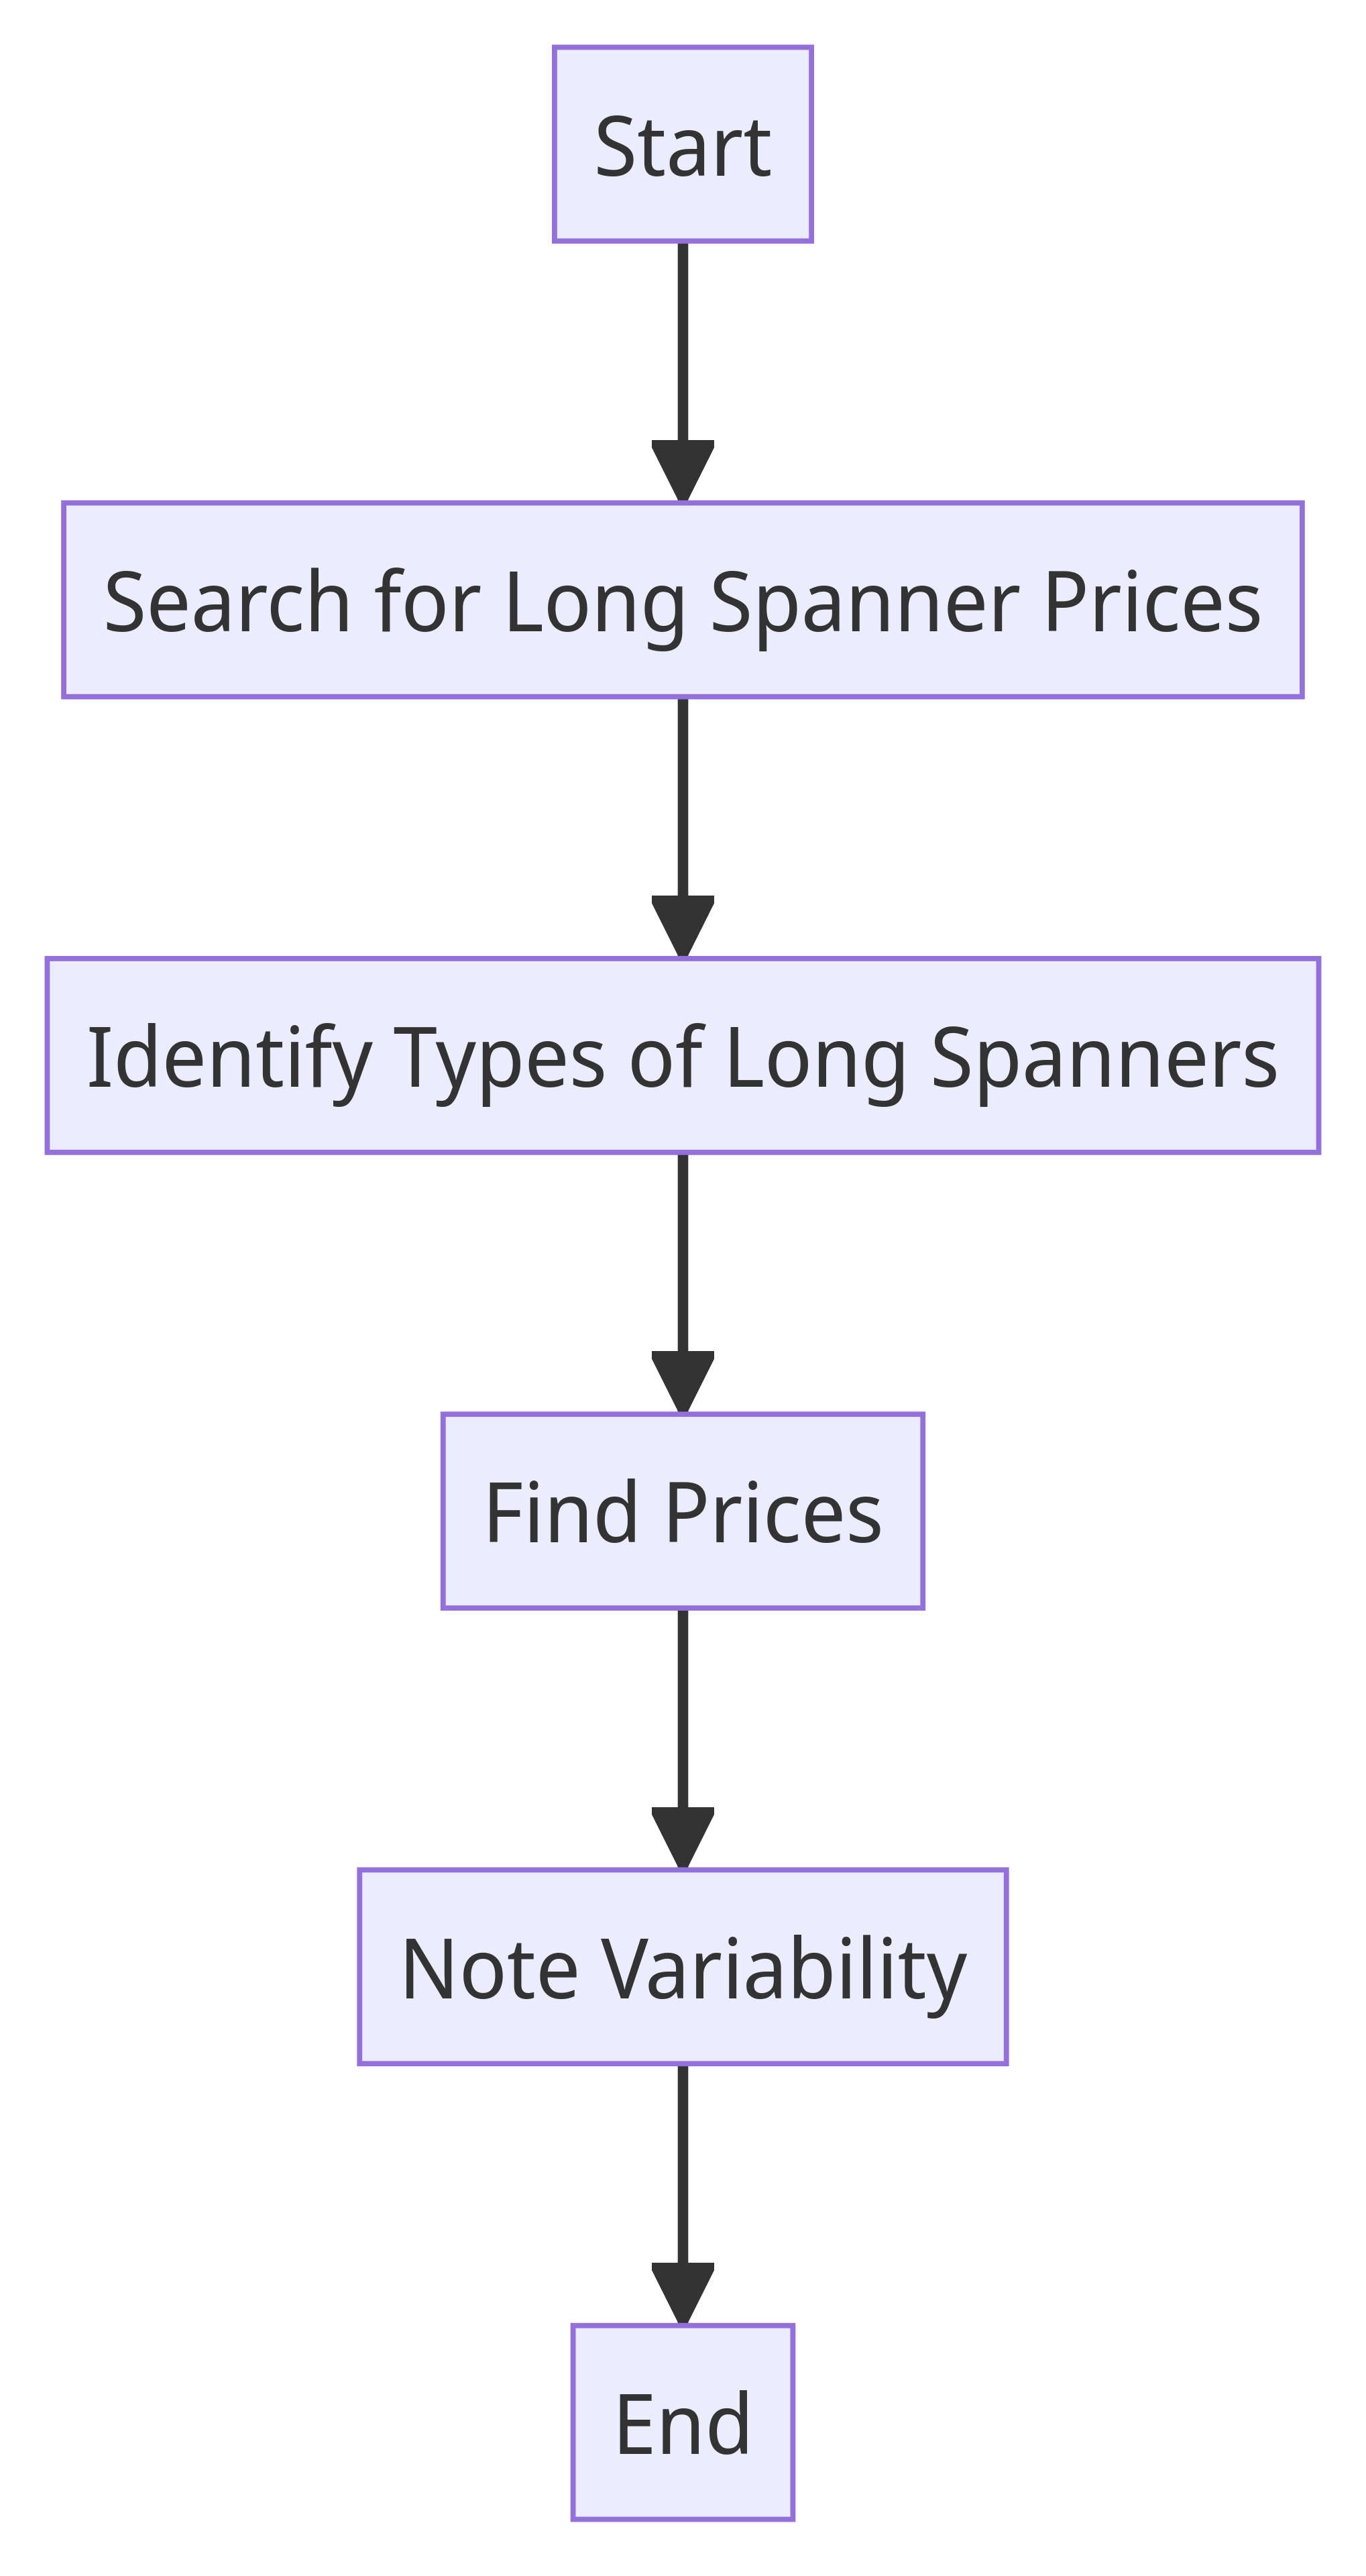 Flowchart of Long Spanner Price Search